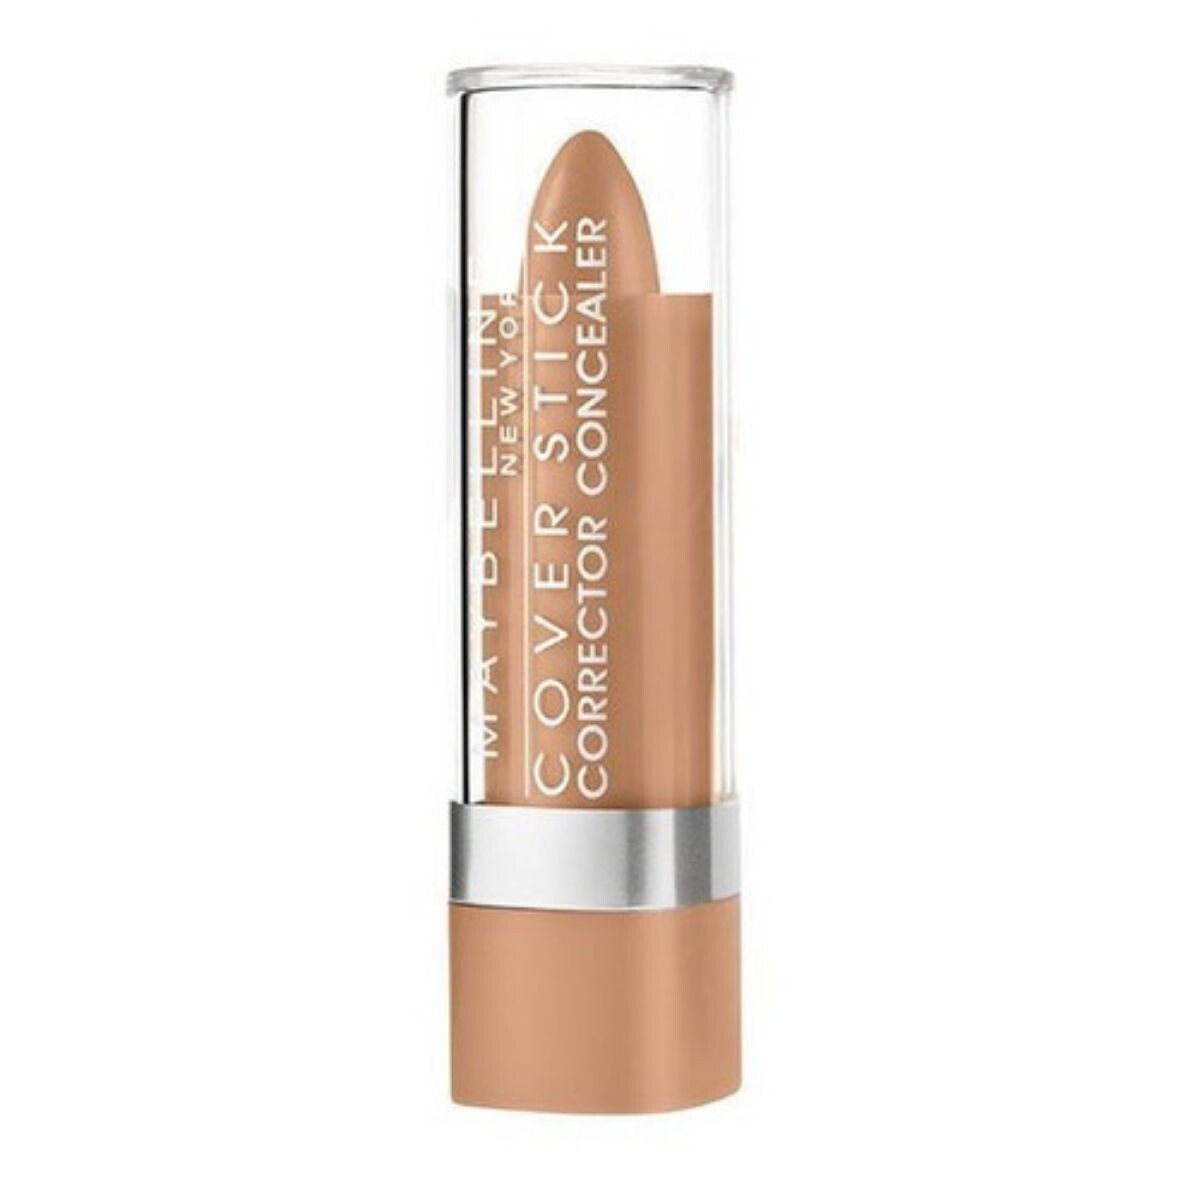 Corrector Maybelline Cover Stick Perfect Make Up - Oscuro 04 